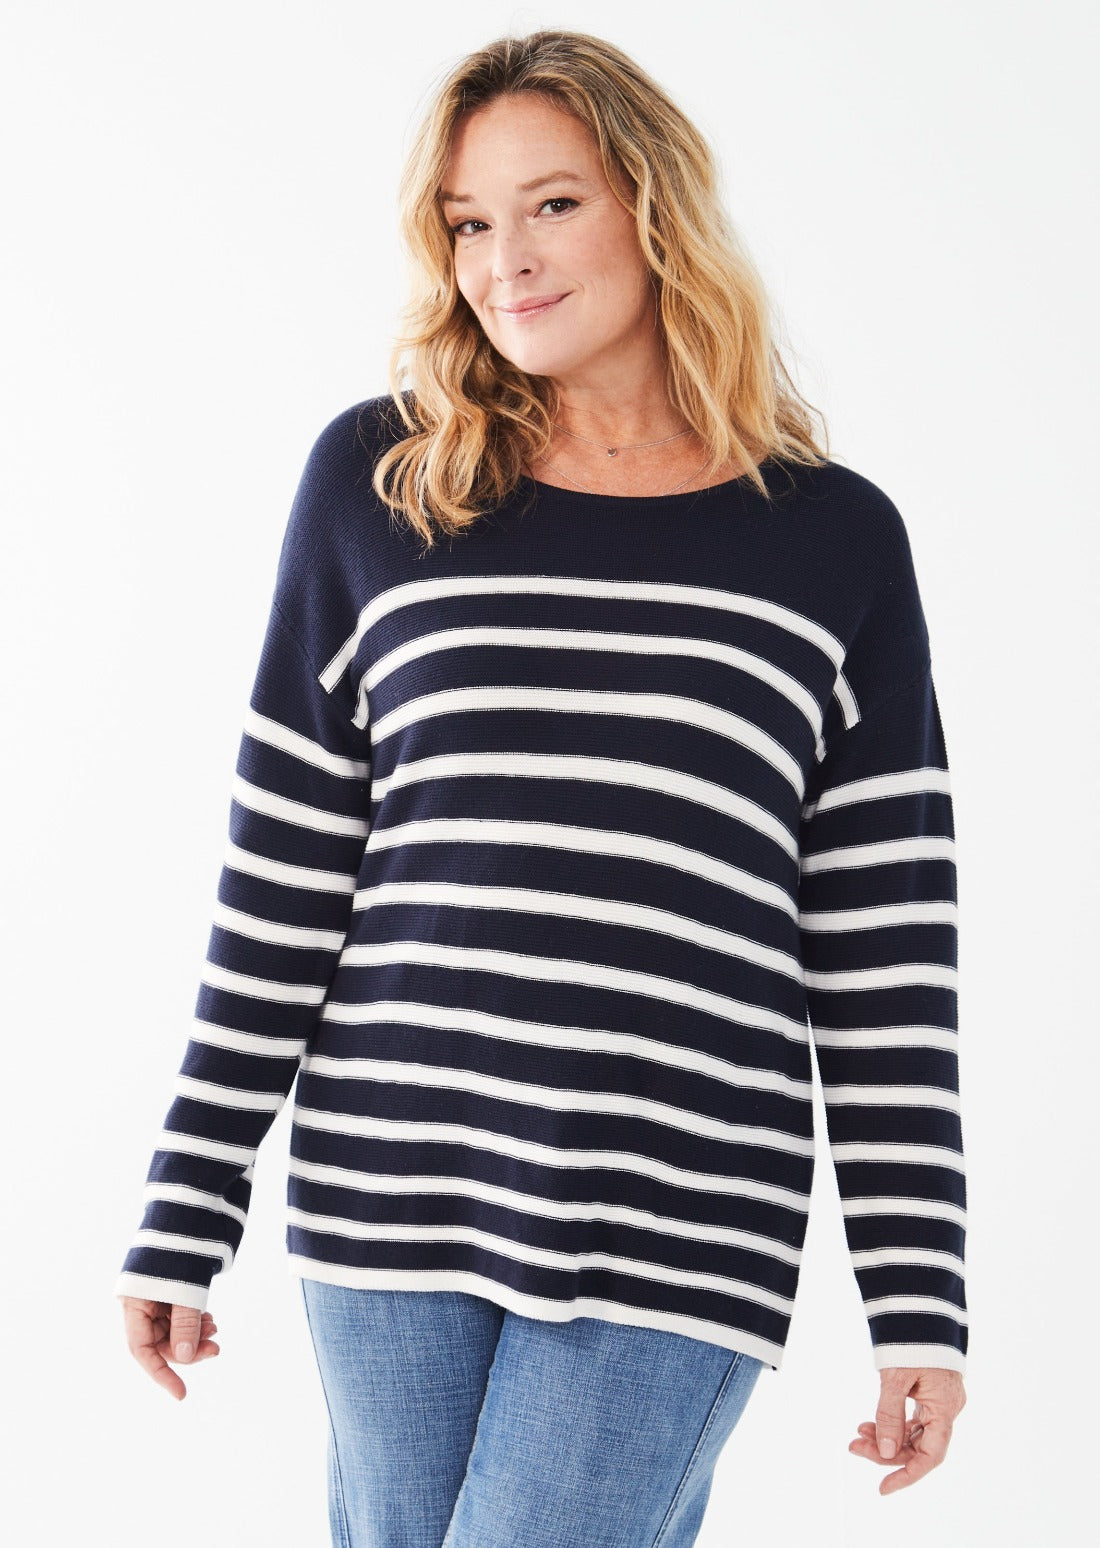 French Dressing Jeans - Striped Sweater